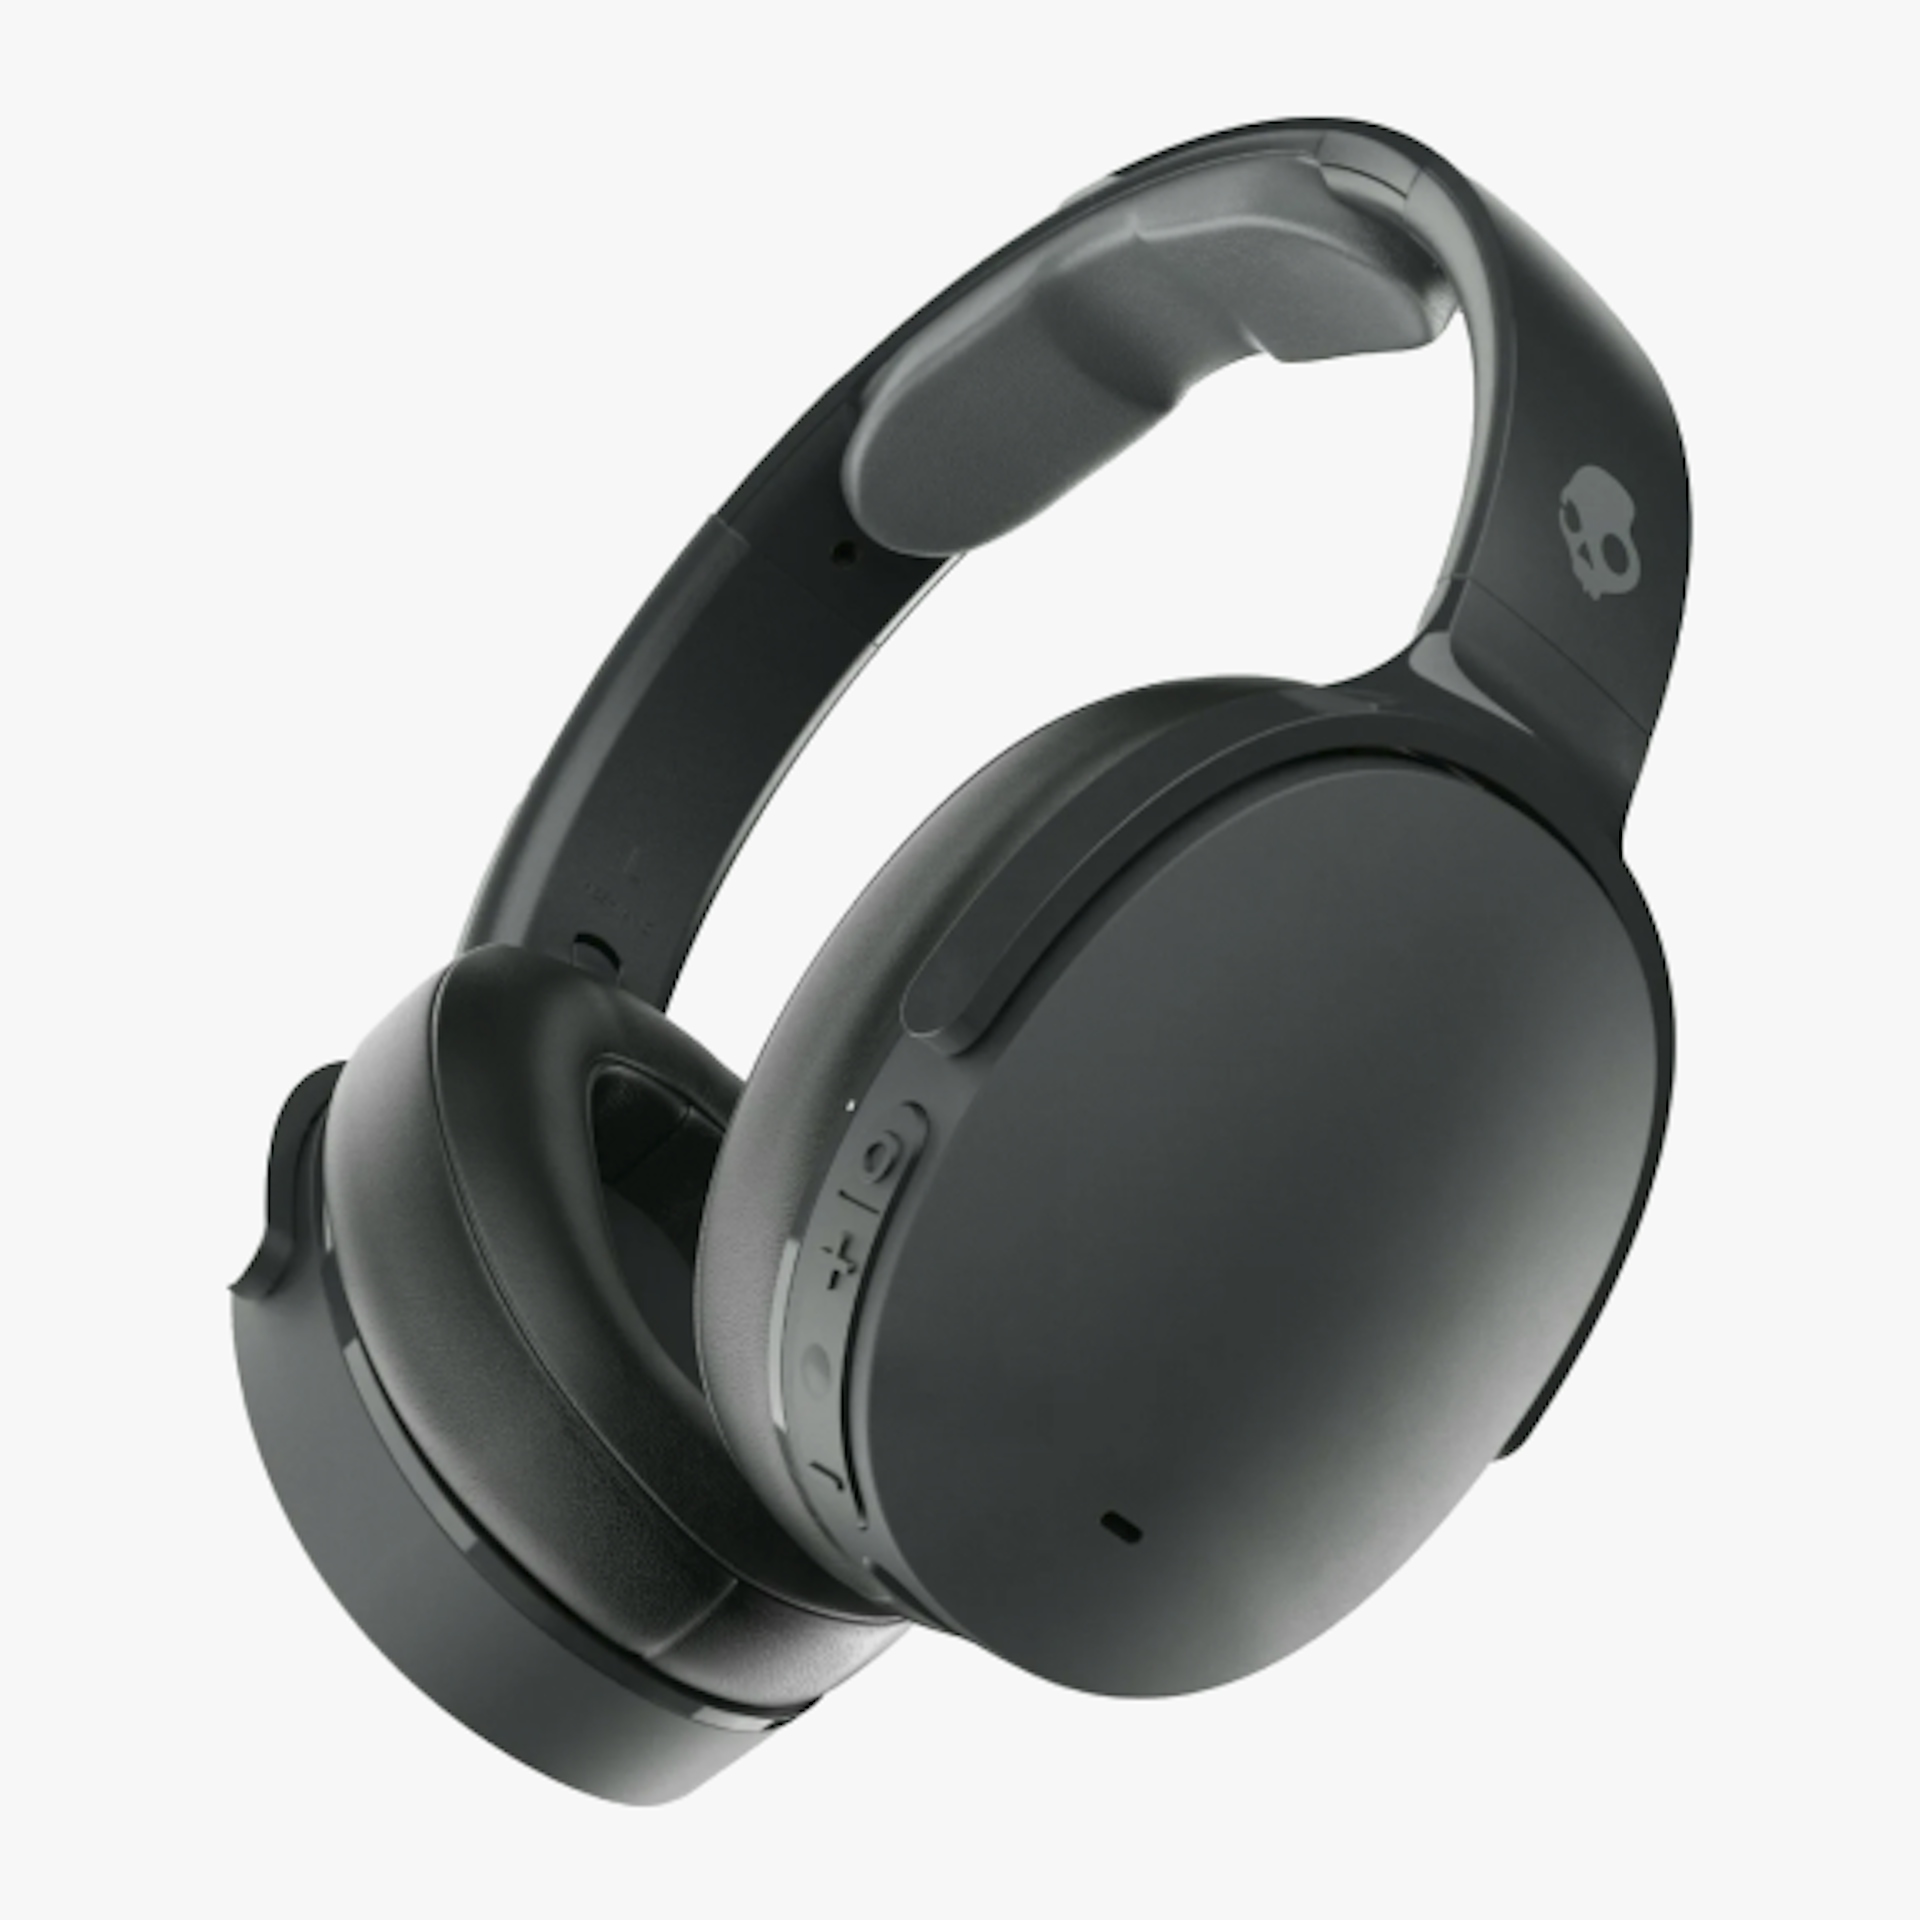 A pair of black Skullcandy over-ear headphones with a sleek design is shown. The headphones feature the Skullcandy logo on the ear cup and have buttons for controls on the side.